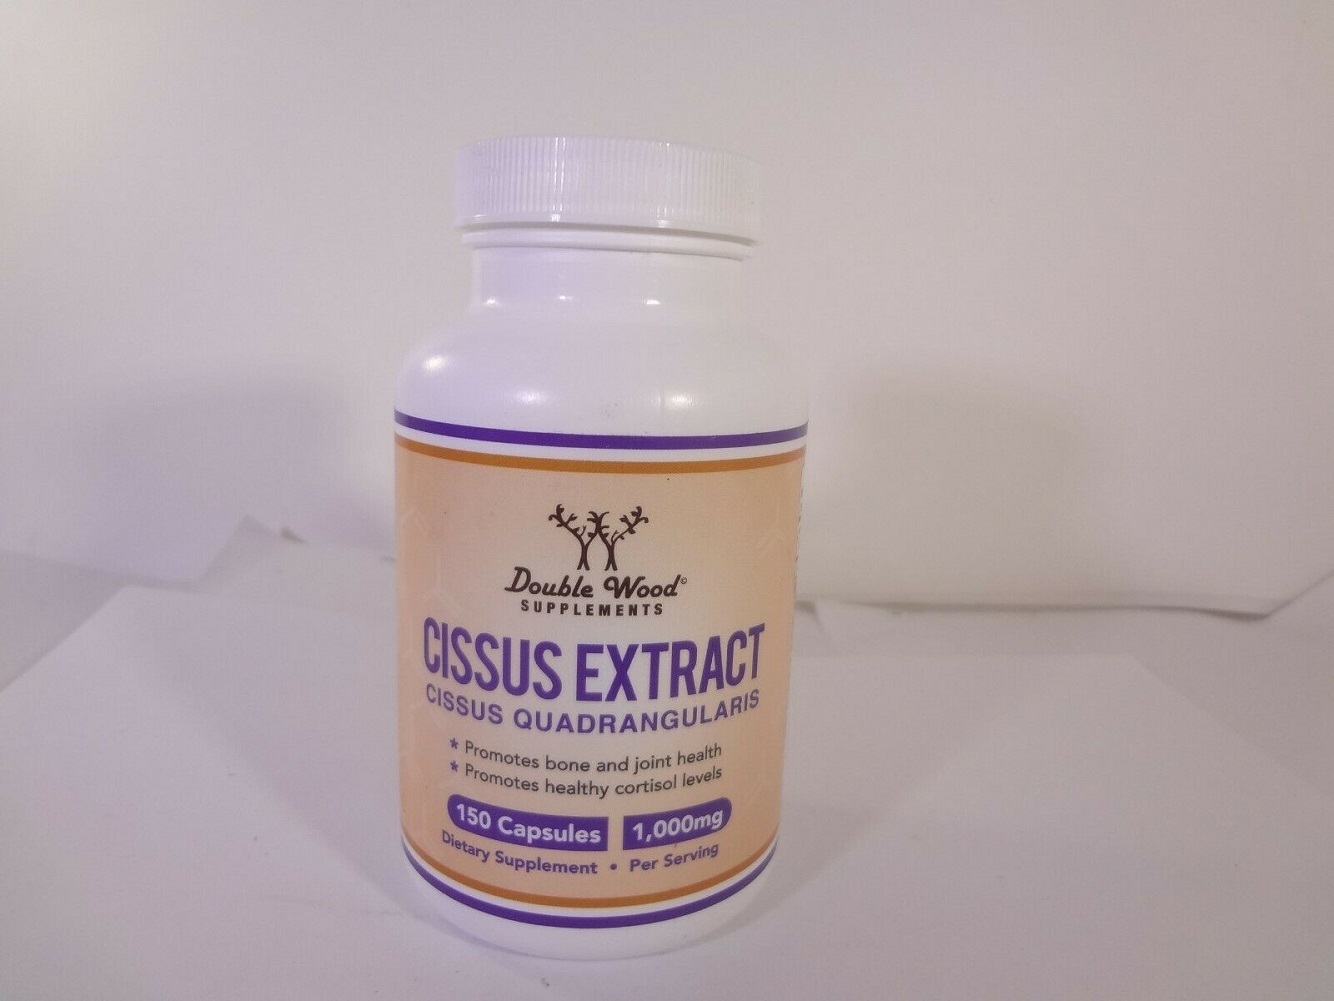 Double Wood Supplements Cissus Extract 1,000 mg 150 Capsules [VS-D]